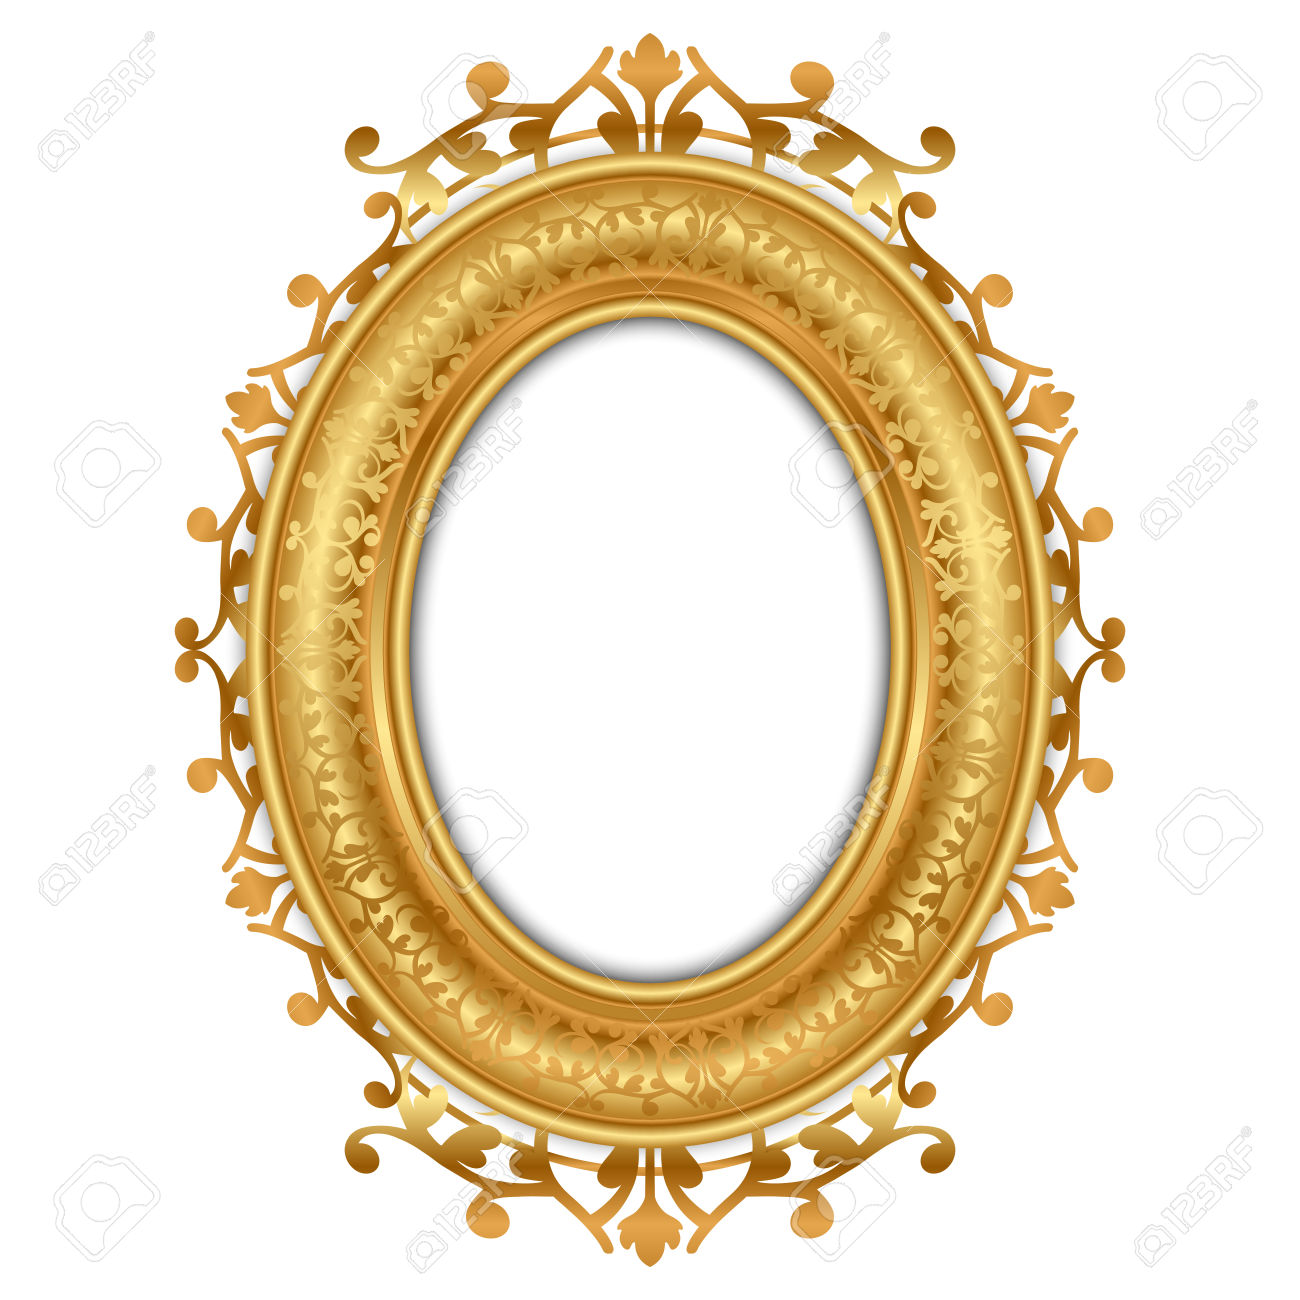 Oval Clipart